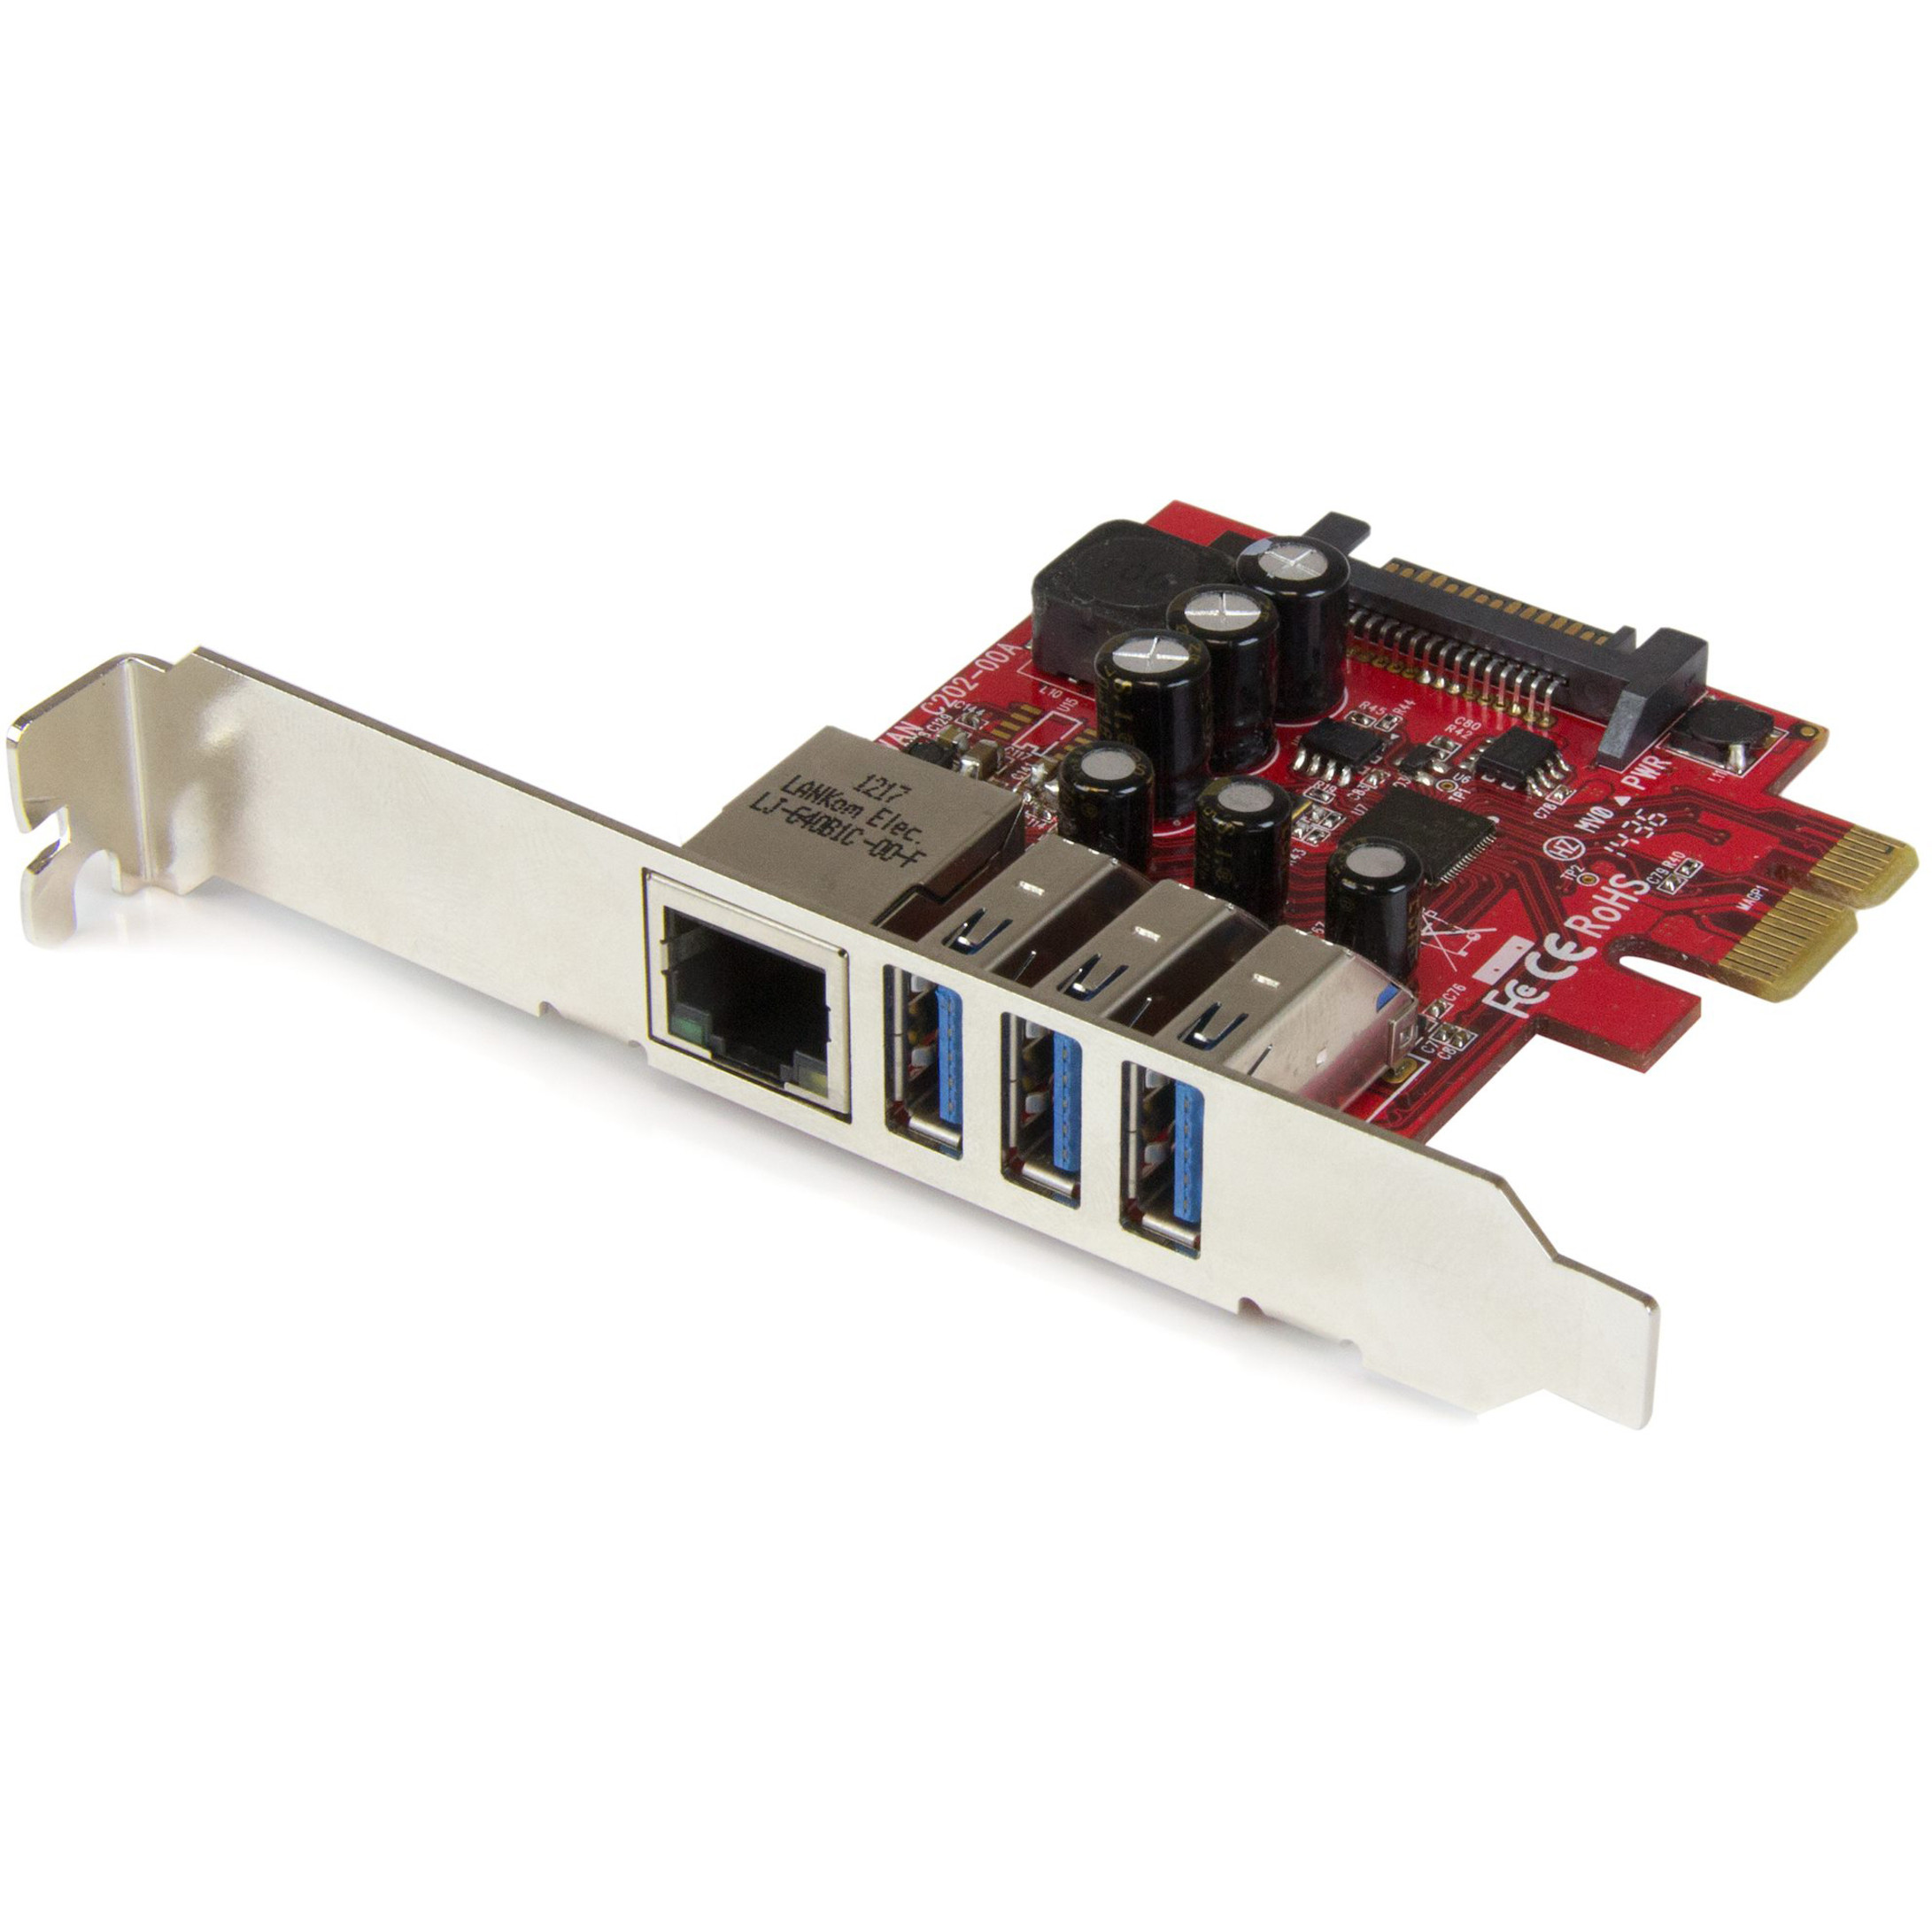 Startech .com 3 Port PCI Express USB 3.0 Card + Gigabit EthernetRunning low on expansion slots? USB 3.0 and GbE into a single PCIe c... PEXUSB3S3GE - Corporate Armor